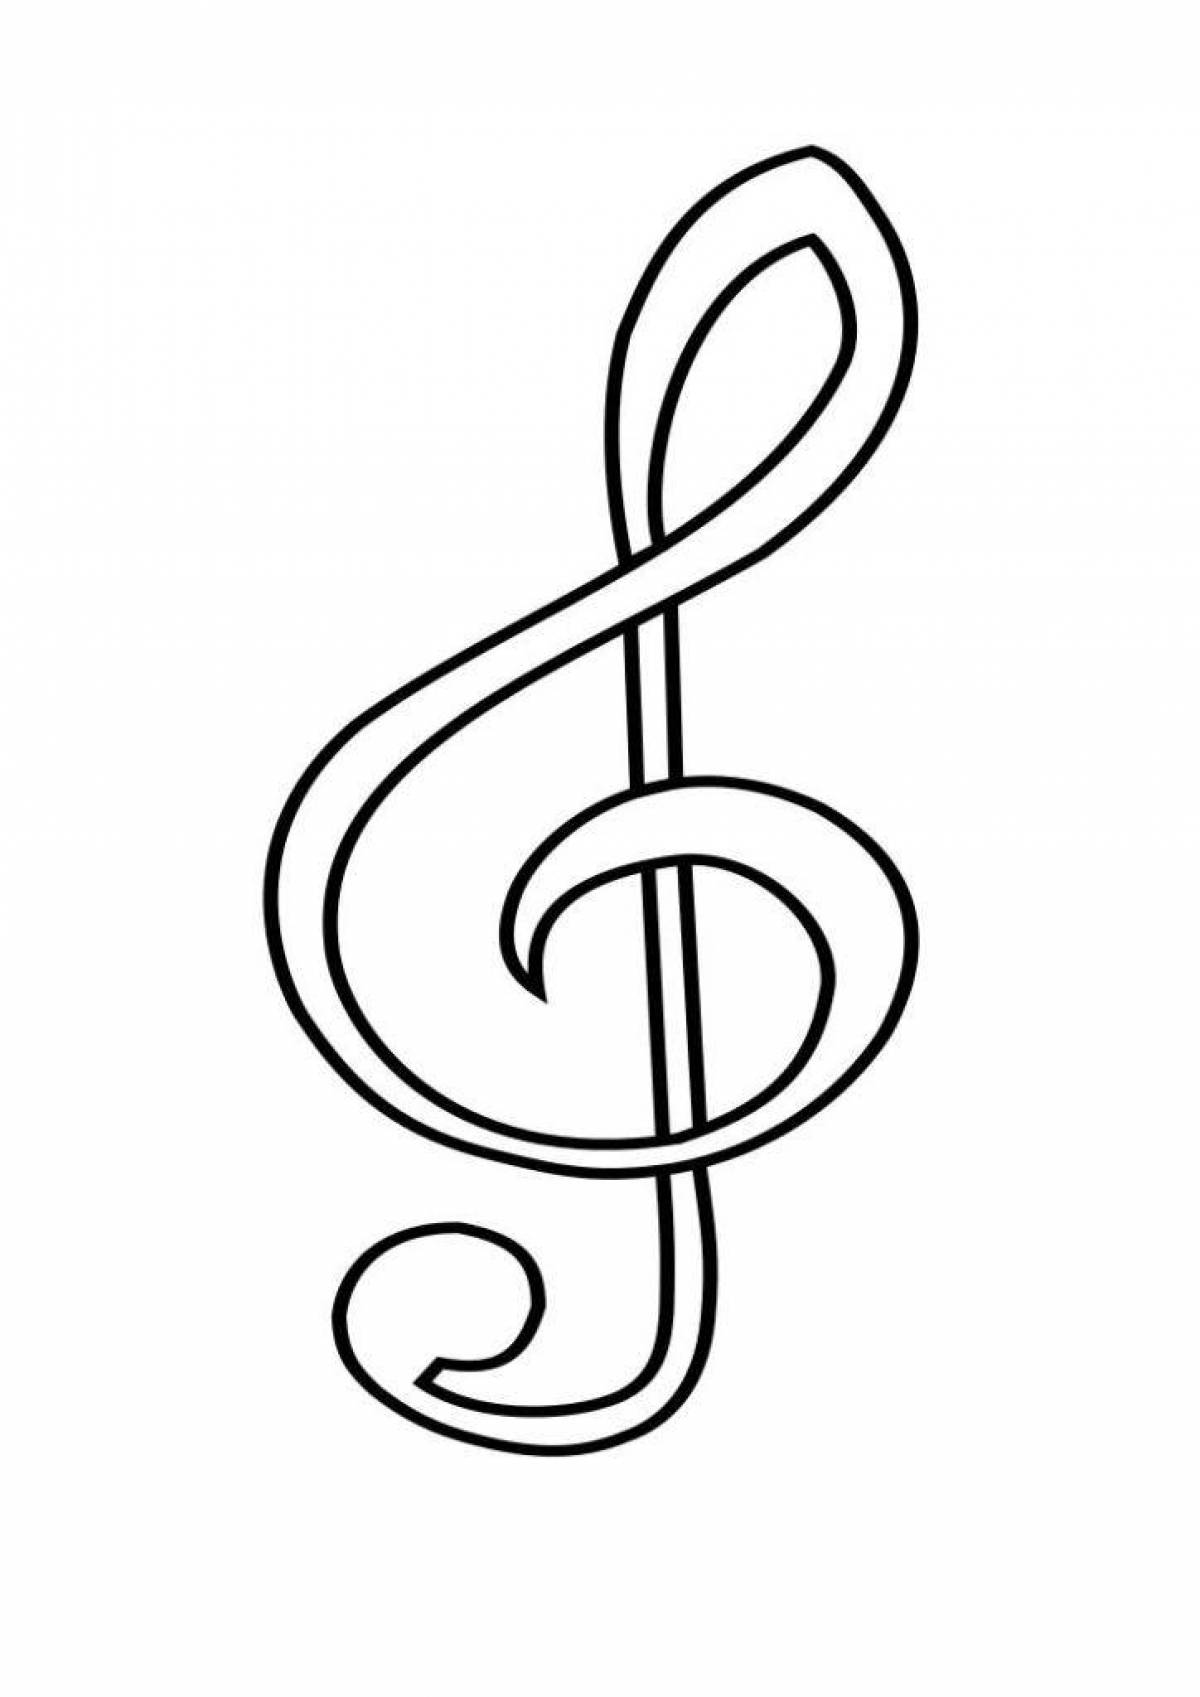 Music notes and treble clef #6